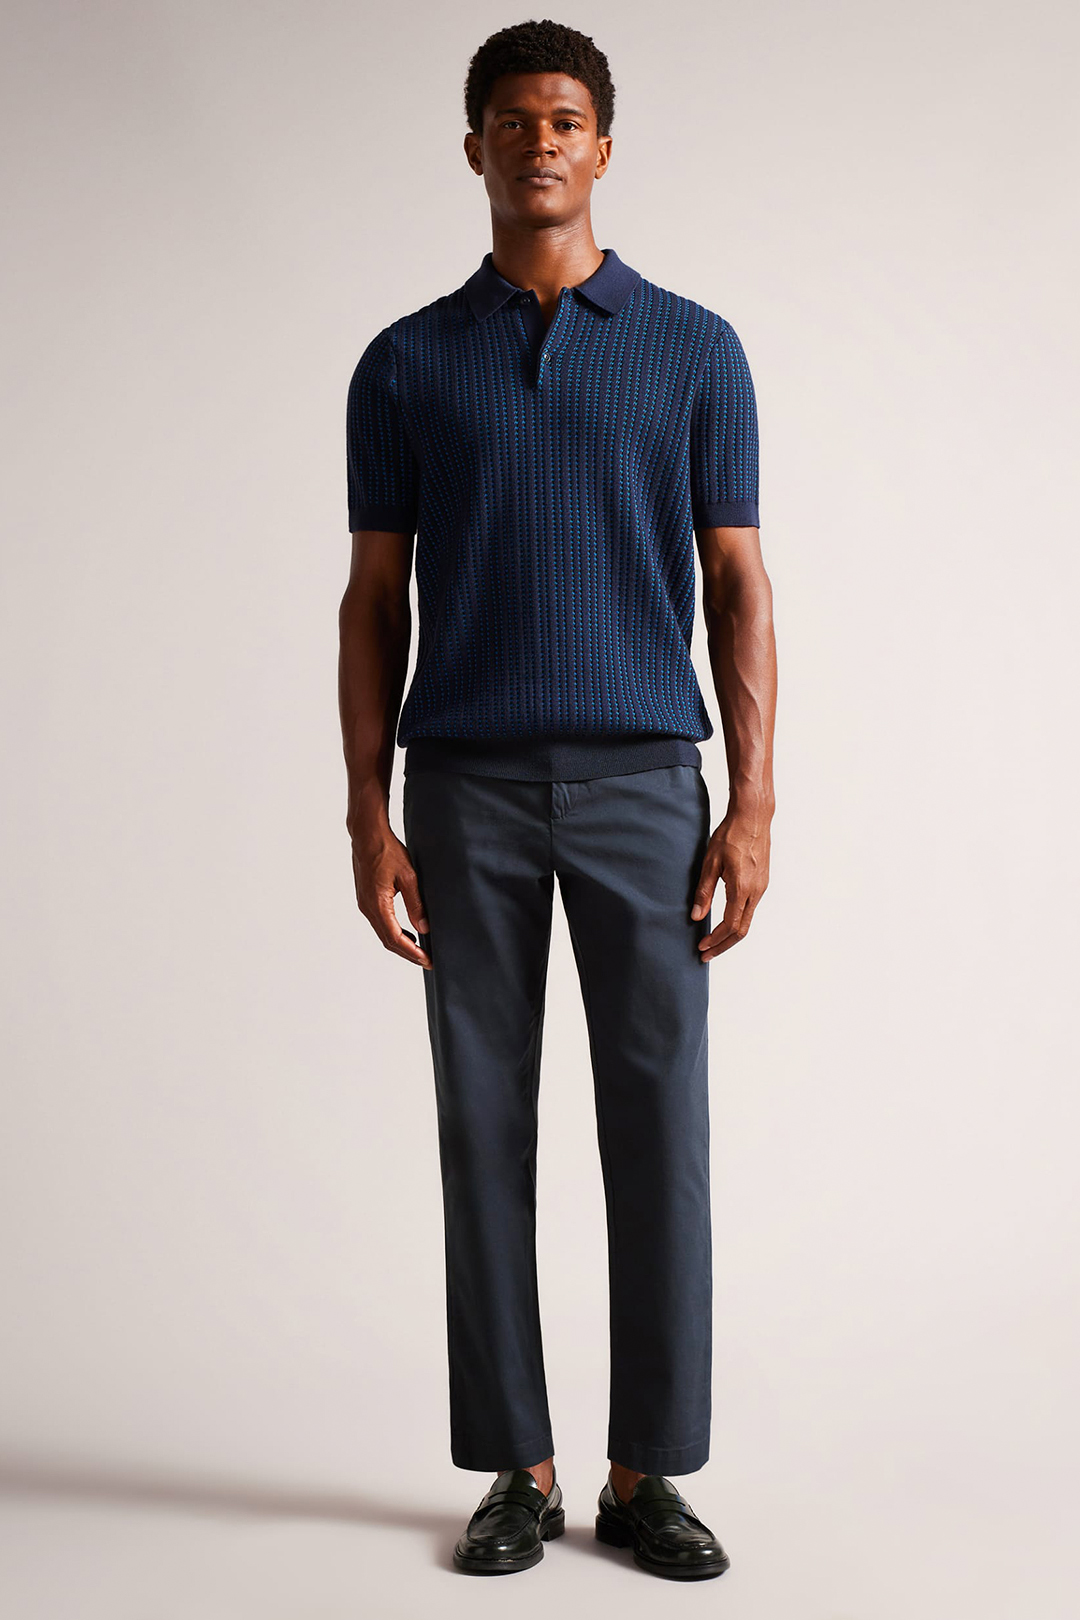 Navy polo t-shirt, navy chinos, and black loafers outfit